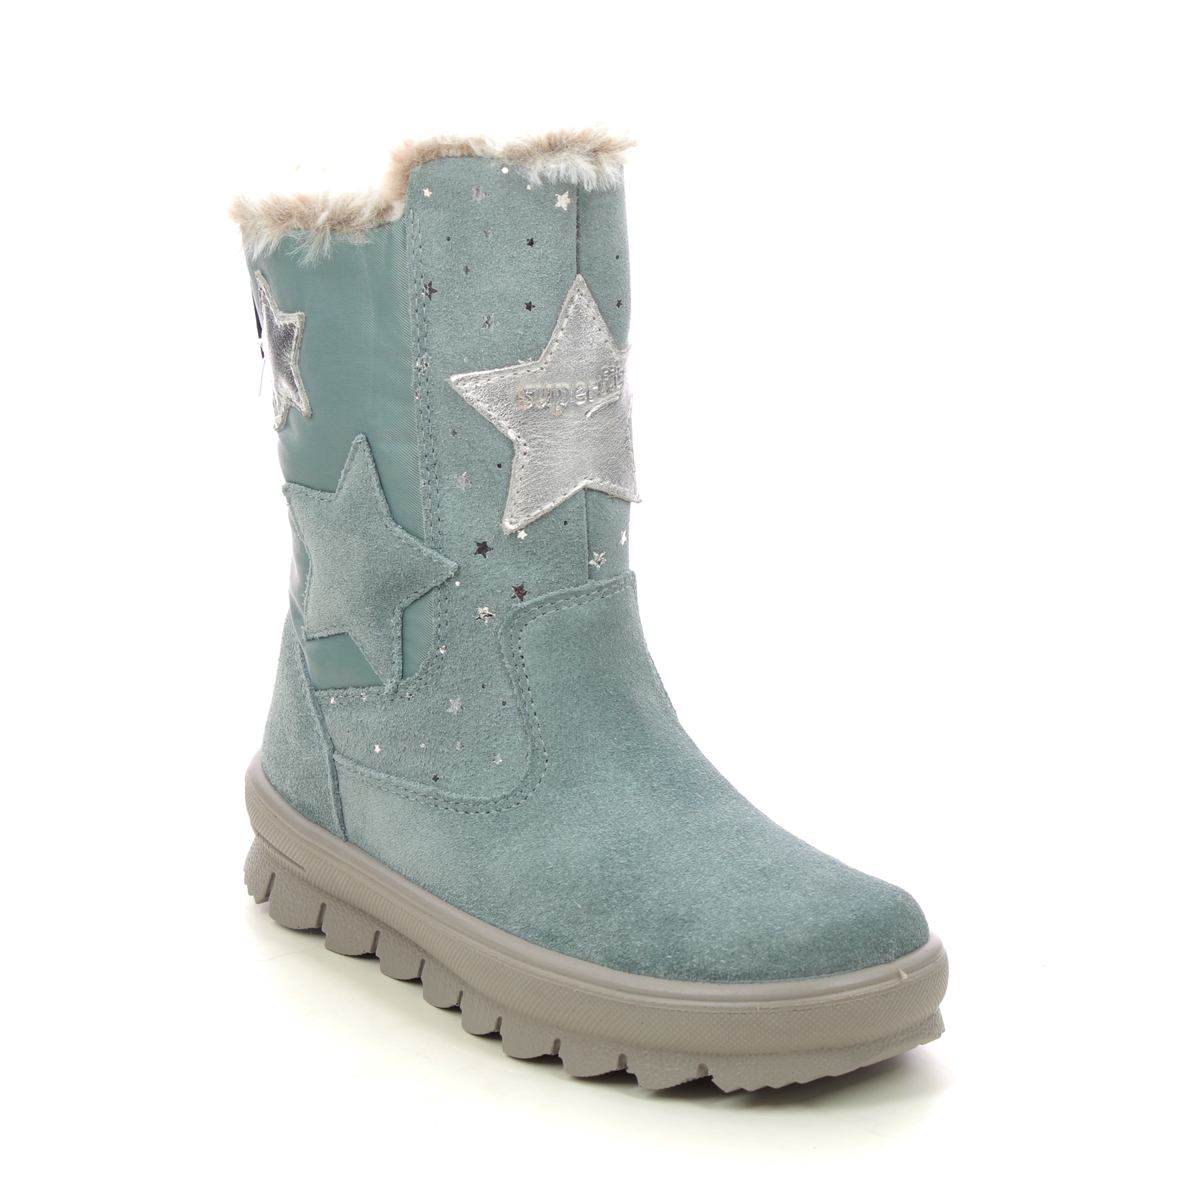 Superfit Flavia Star Gtx Blue Suede Kids Girls Boots 1000219-7500 In Size 29 In Plain Blue Suede For kids